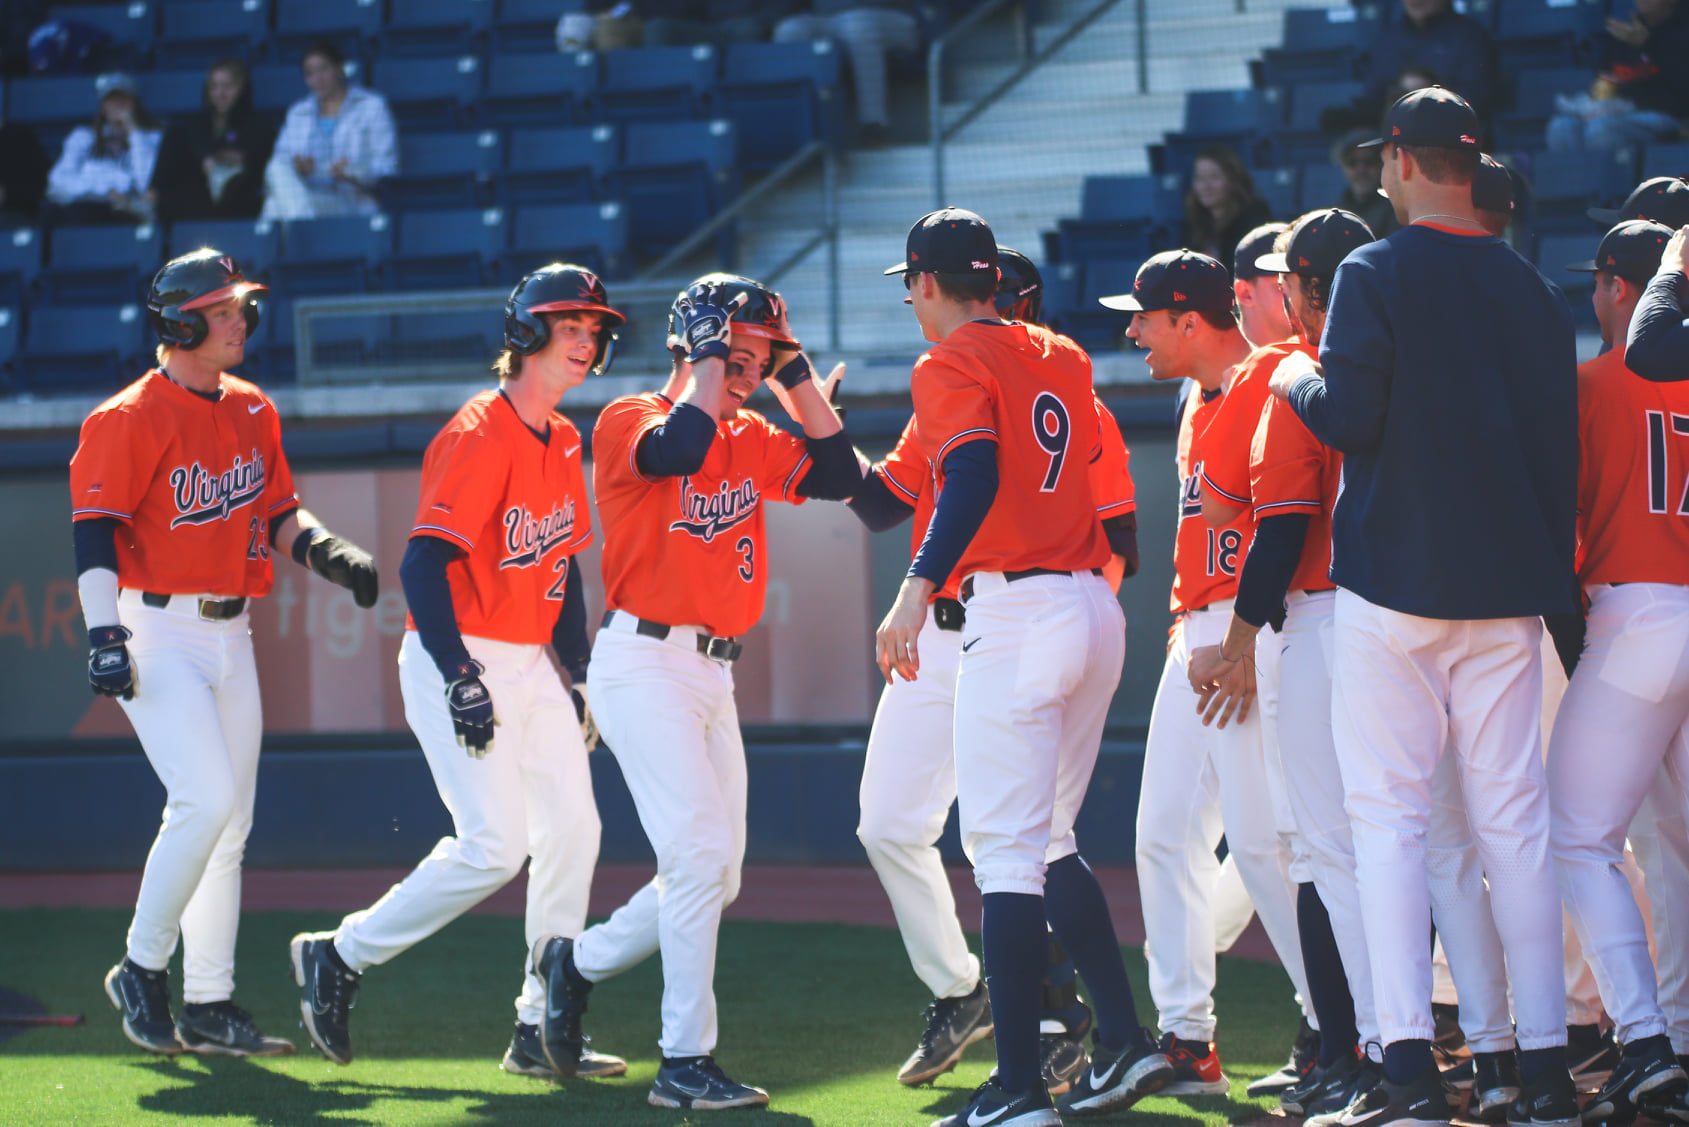 Virginia Completes Sweep With 10-3 Win Against North Carolina